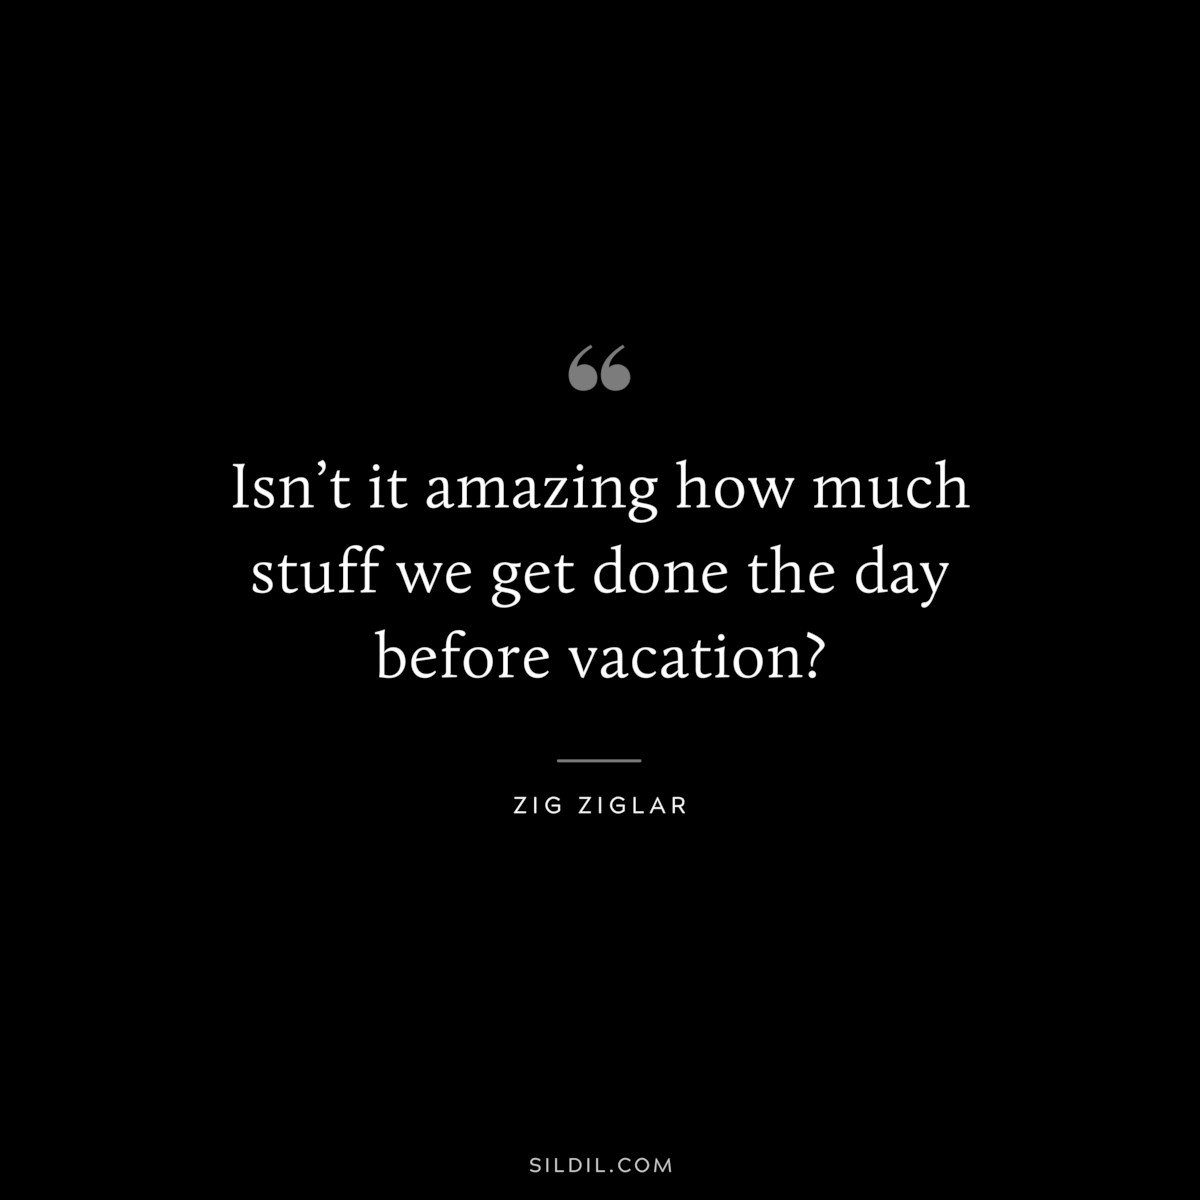 Isn’t it amazing how much stuff we get done the day before vacation? ― Zig Ziglar